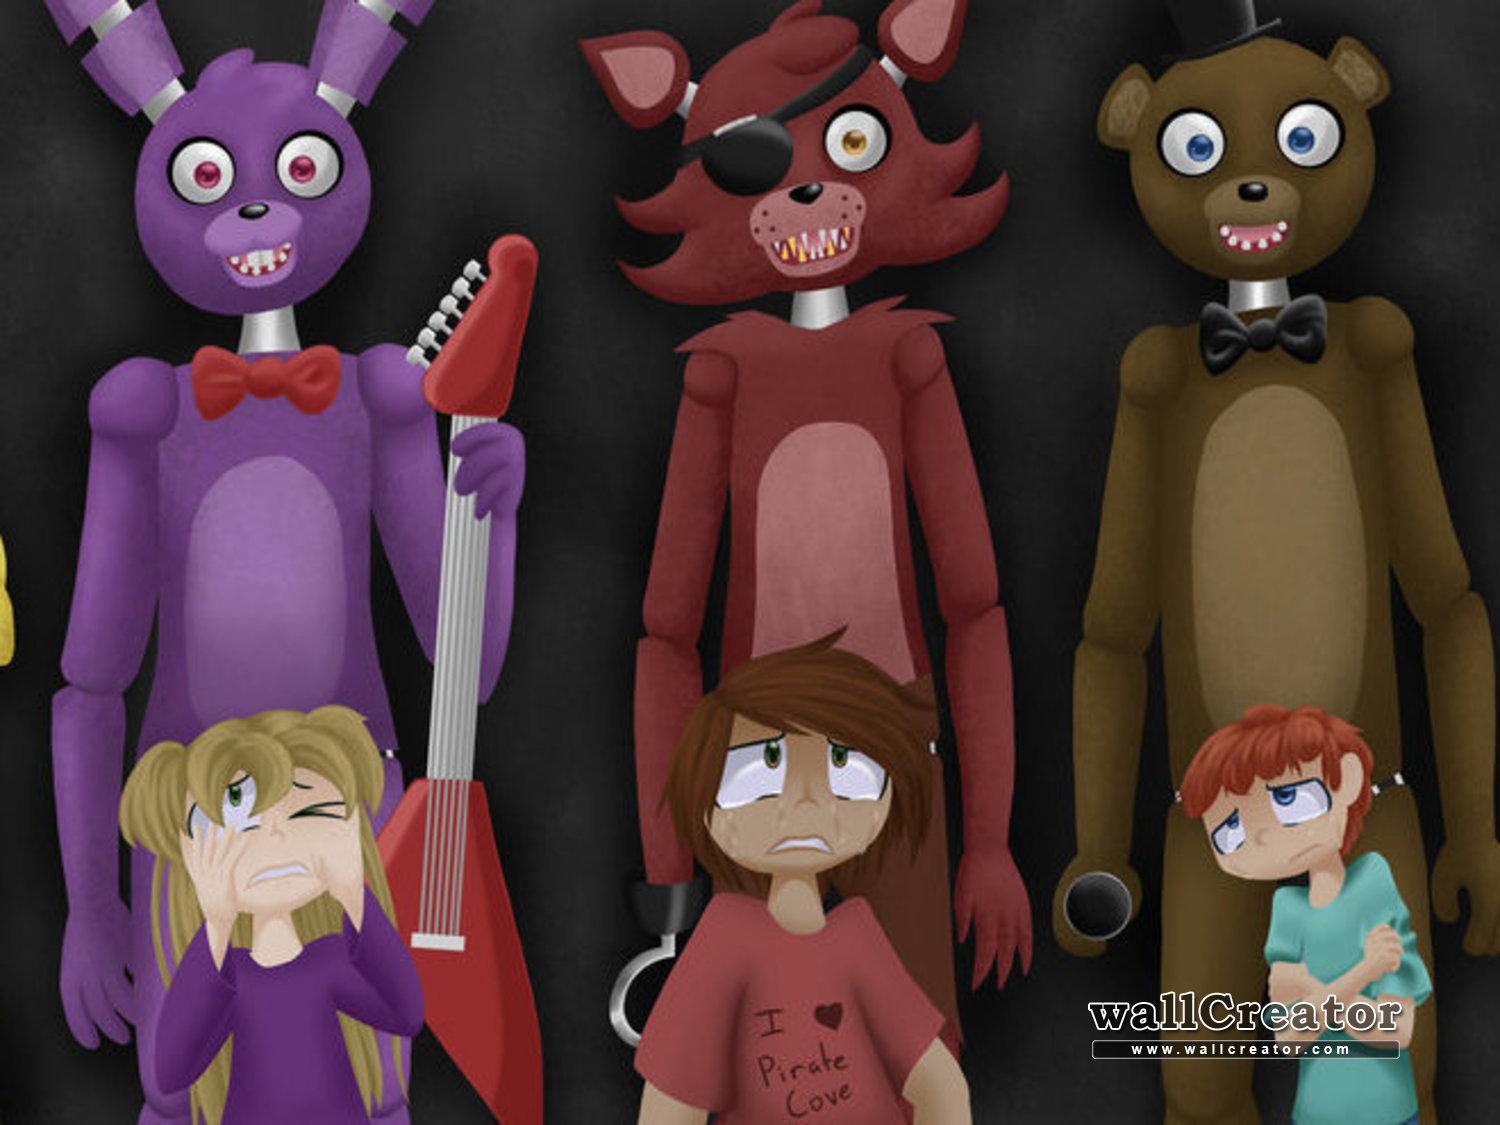 Free download awesome fnaf wallpaper 2000 1125 Wallpaper [1500x1125] for your Desktop, Mobile & Tablet. Explore Cute Fnaf Wallpaper for Desktop. FNAF Free Wallpaper, FNAF Phone Wallpaper, FNAF Wallpaper for Computer